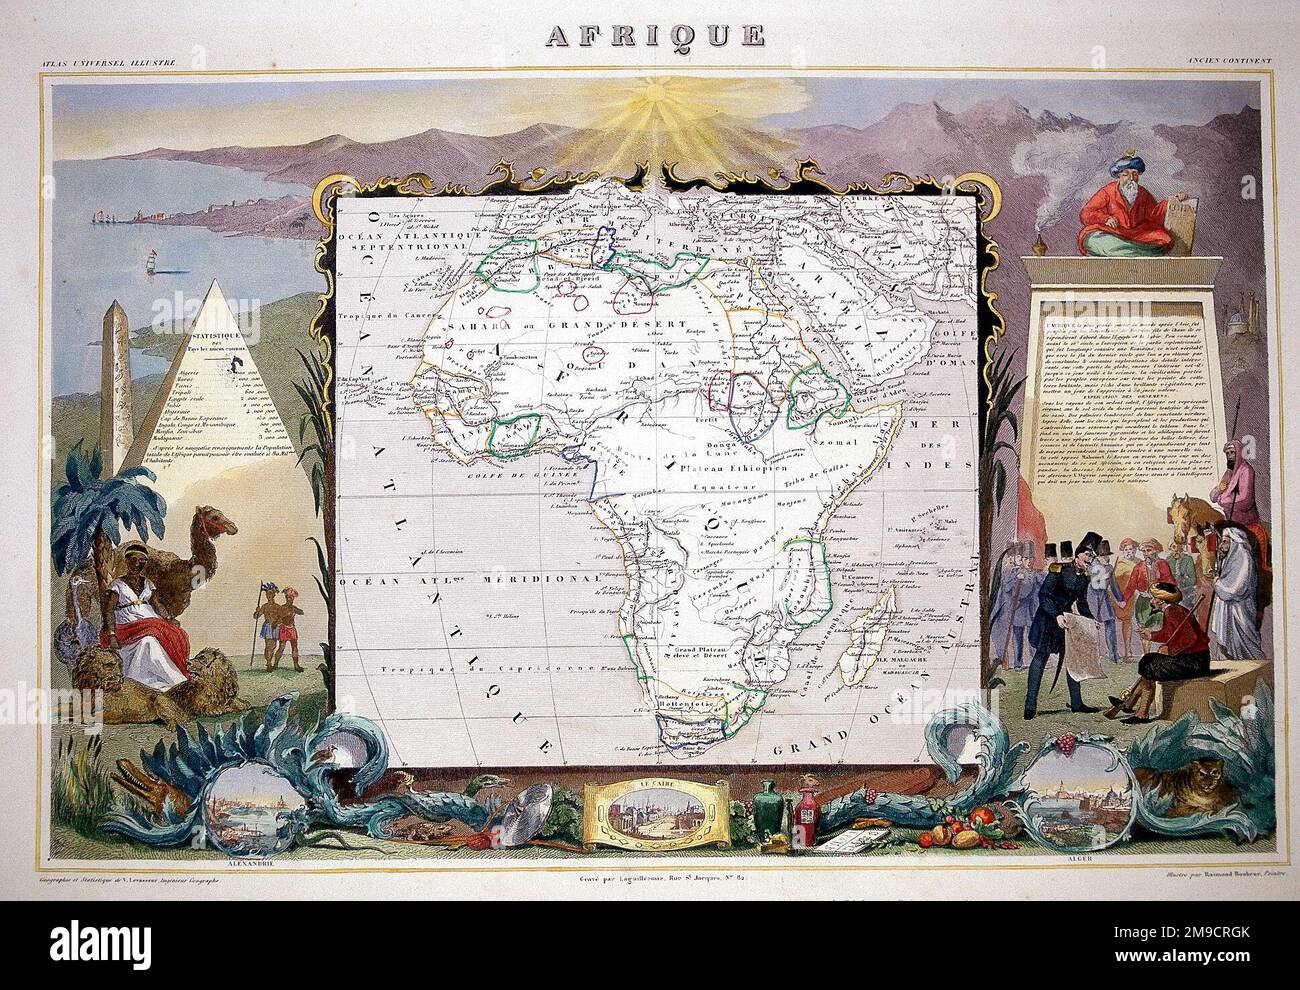 19th century Map of Africa Stock Photo